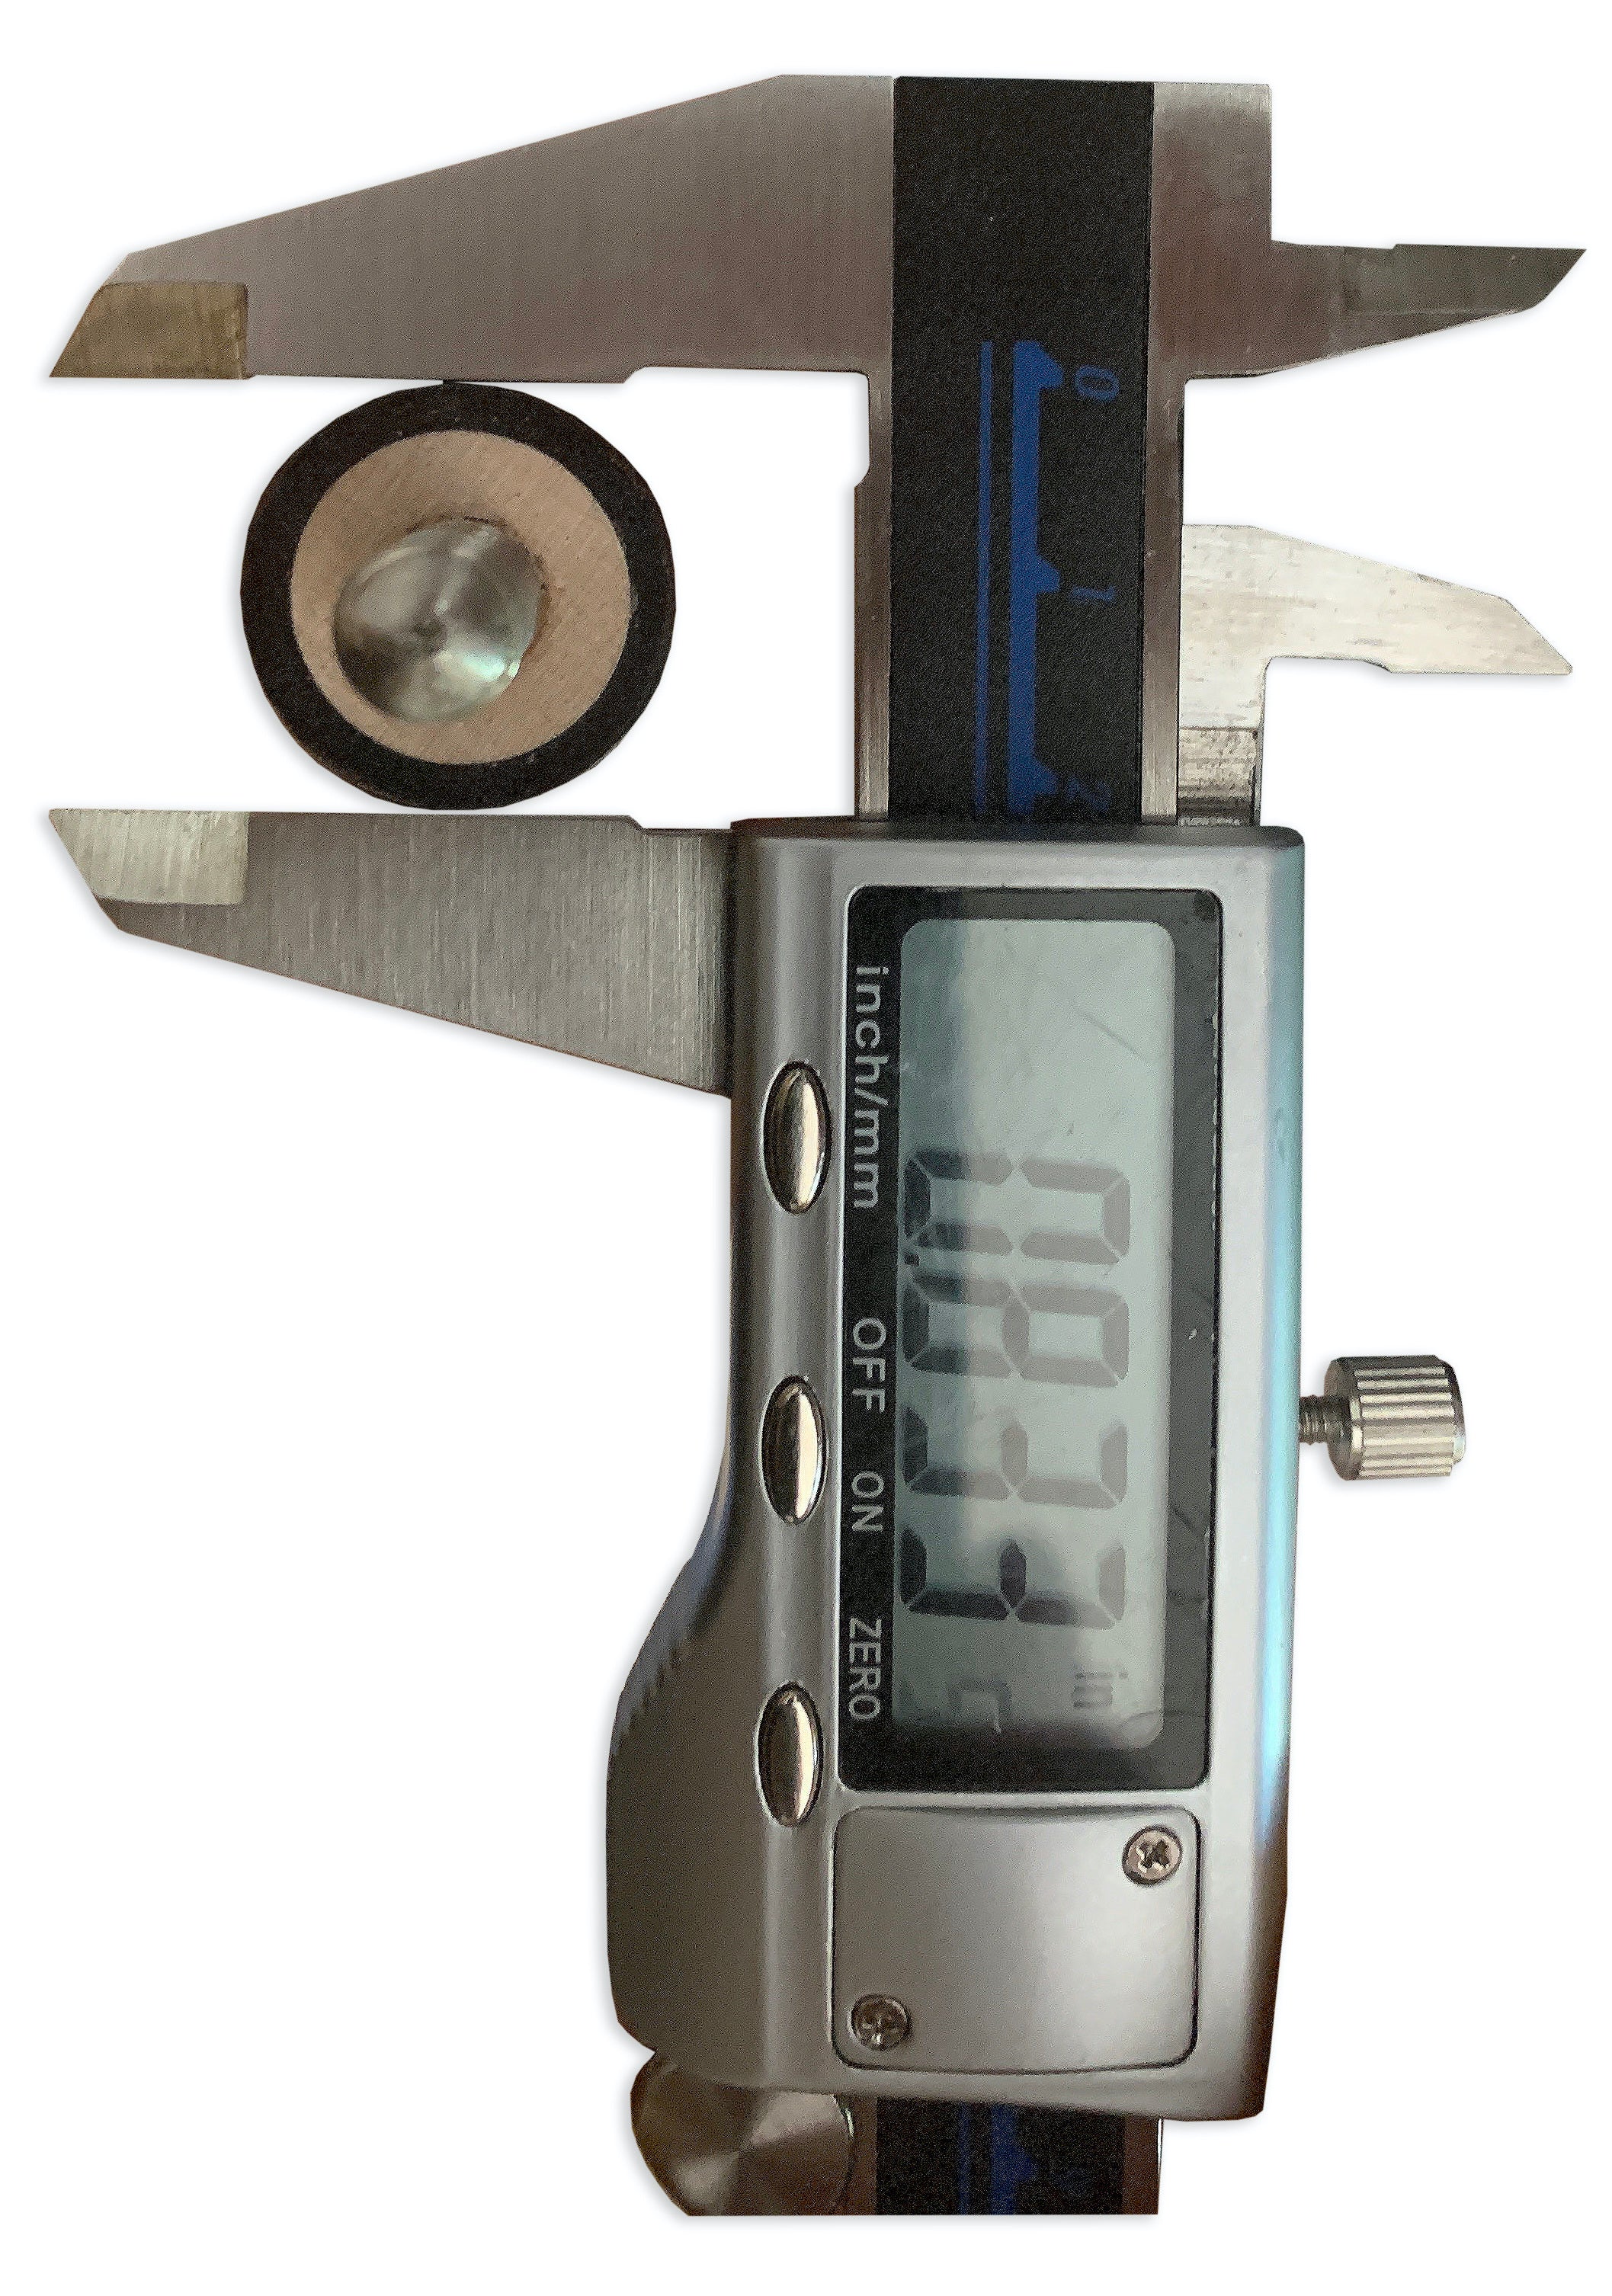 Side view of calipers measuring diameter of pool cue, showing 0.833 on digital scale